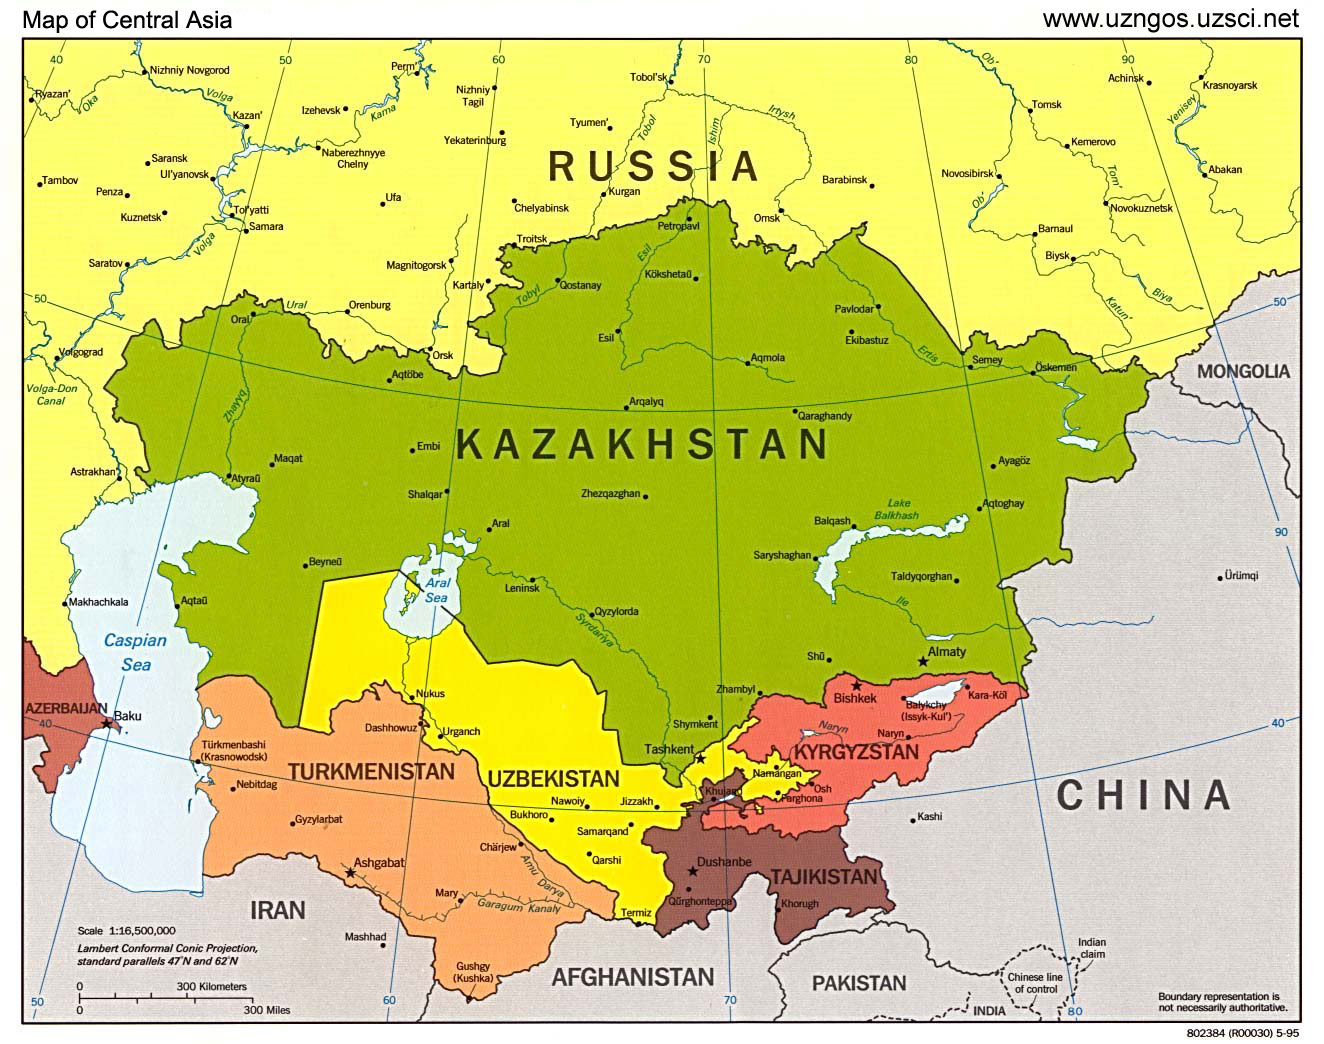 Kyrgyzstan supports new format for cooperation between Central Asian states